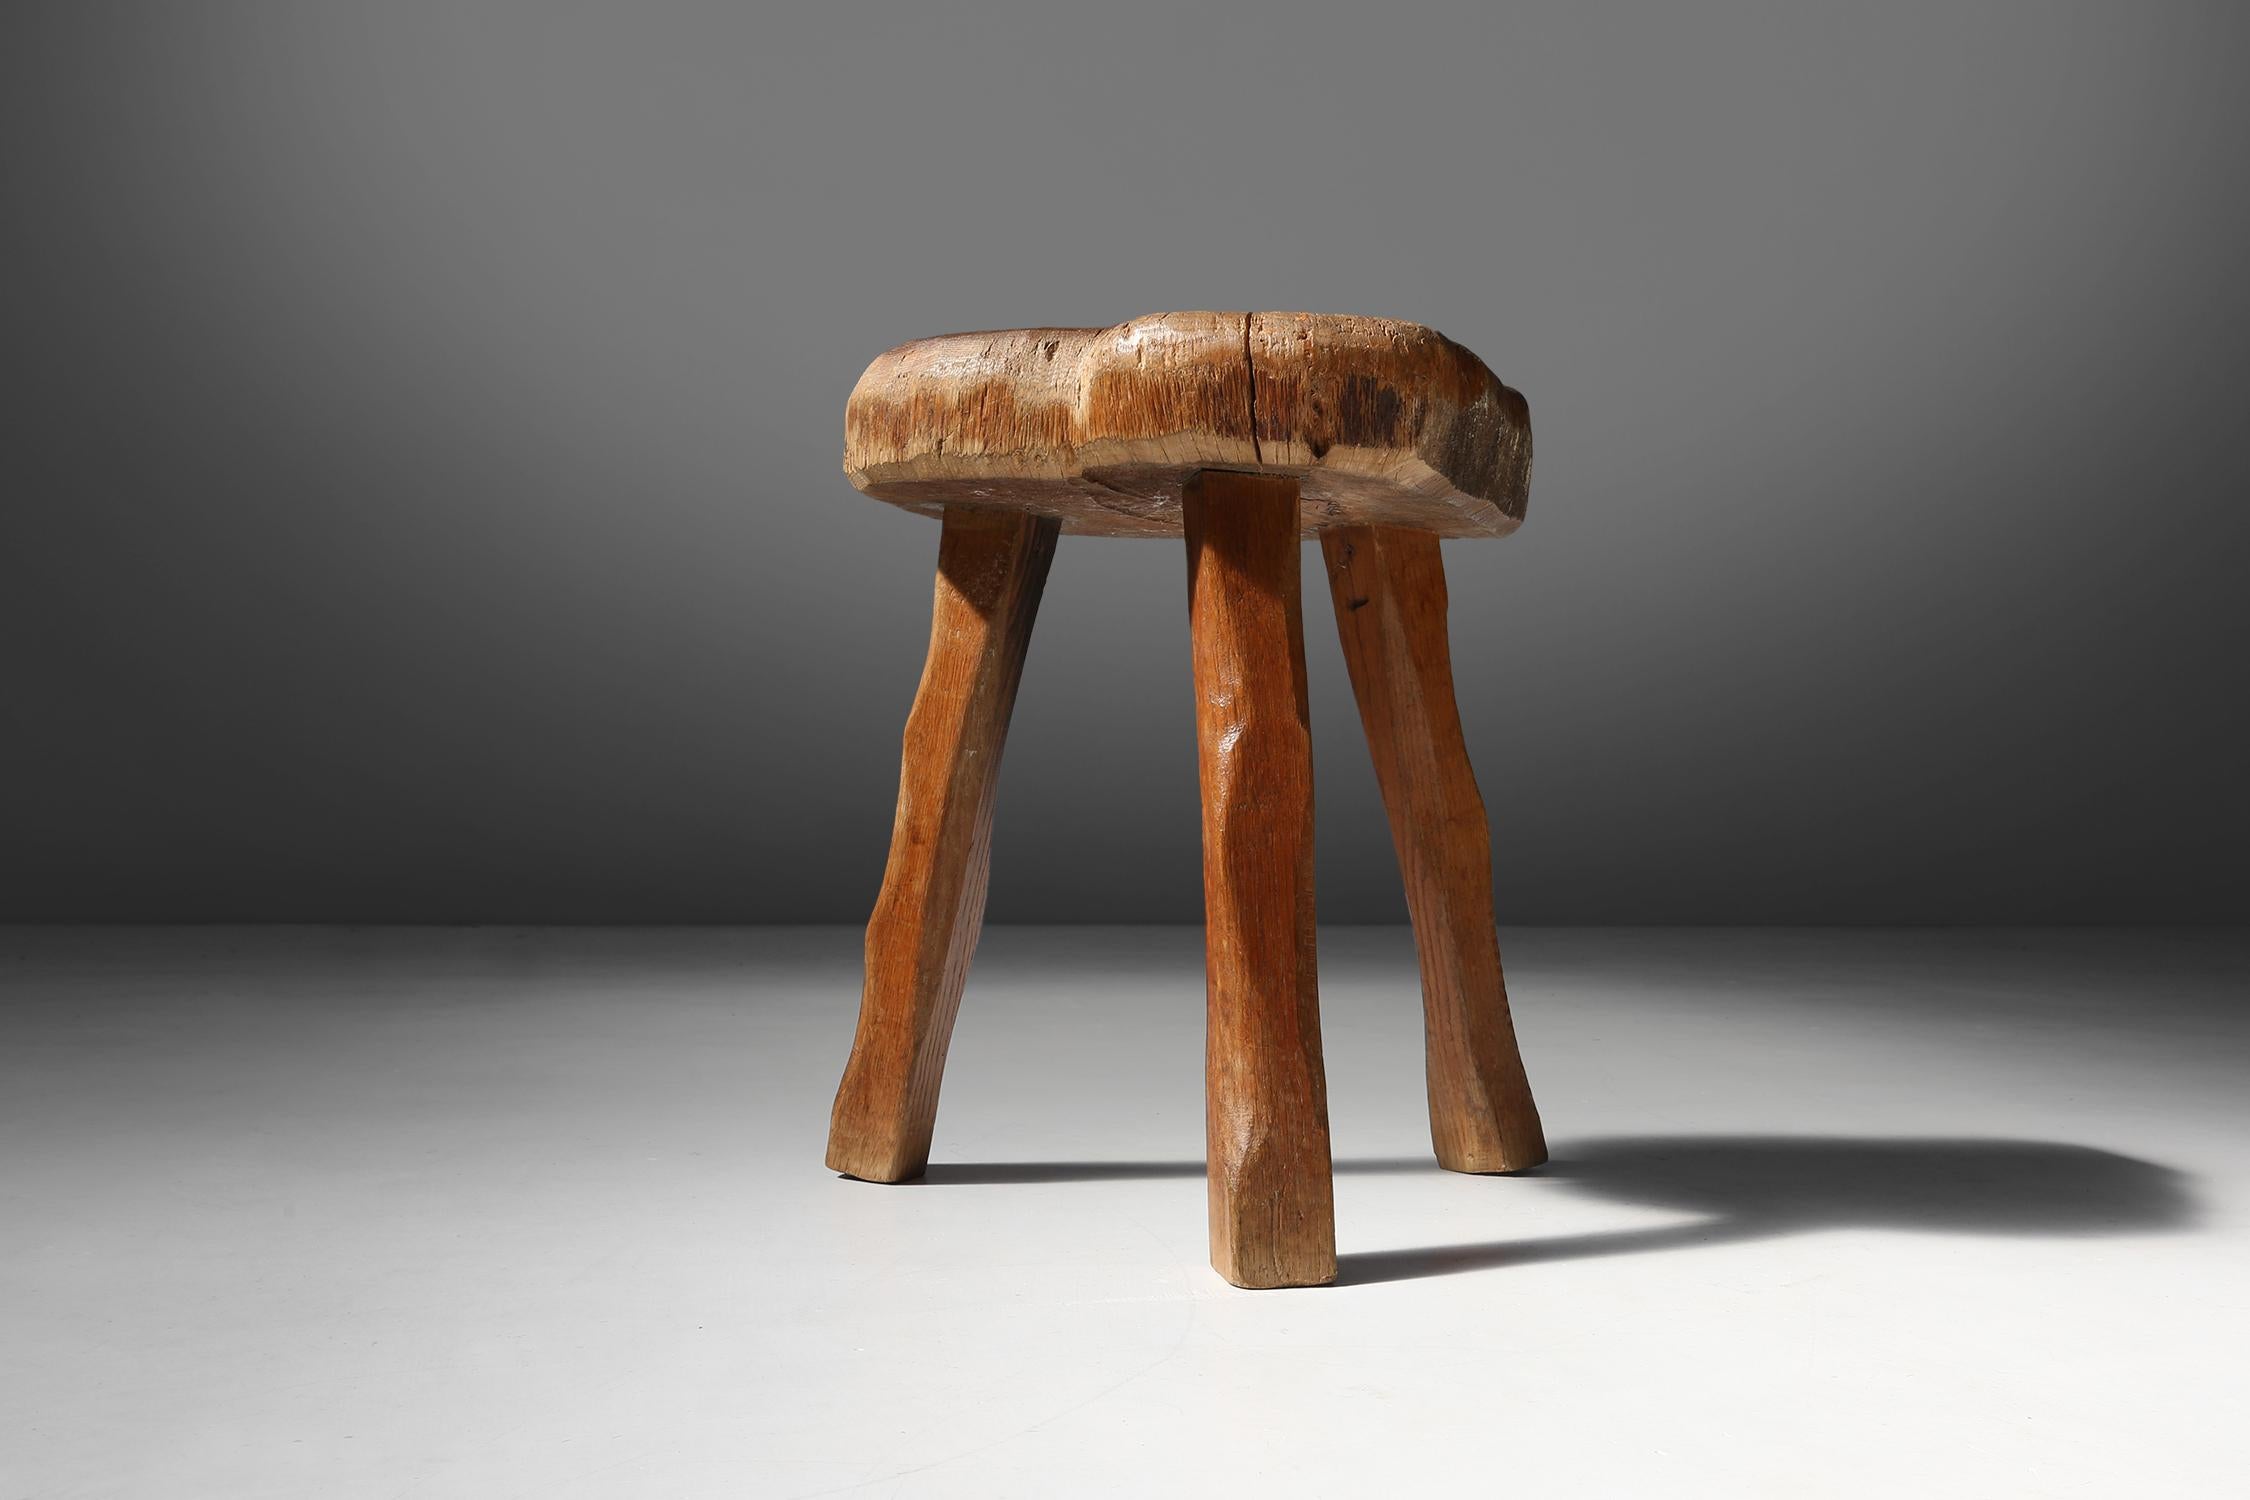 Wood Rustic wooden stool 19th century For Sale